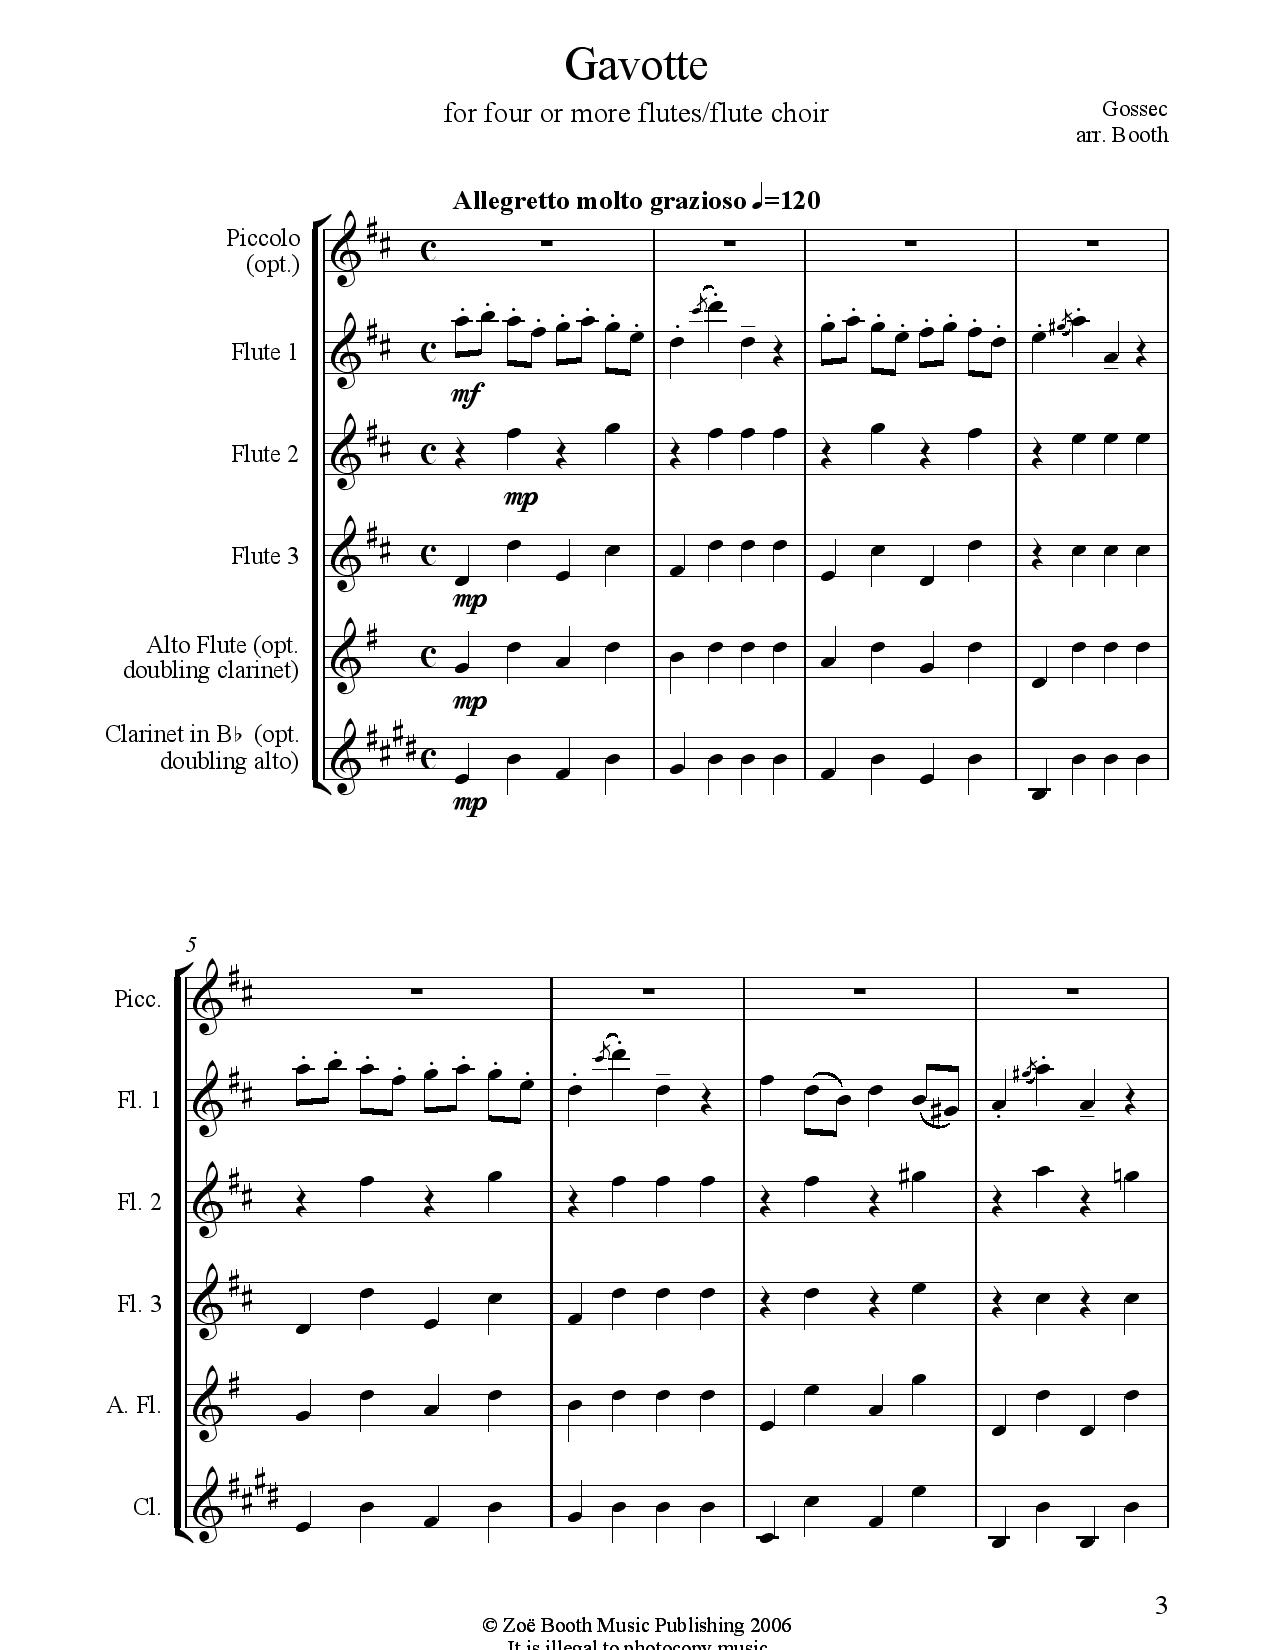 Gavotte by Gossec,  Arranged by Zoë Booth for three or more flutes/flute choir